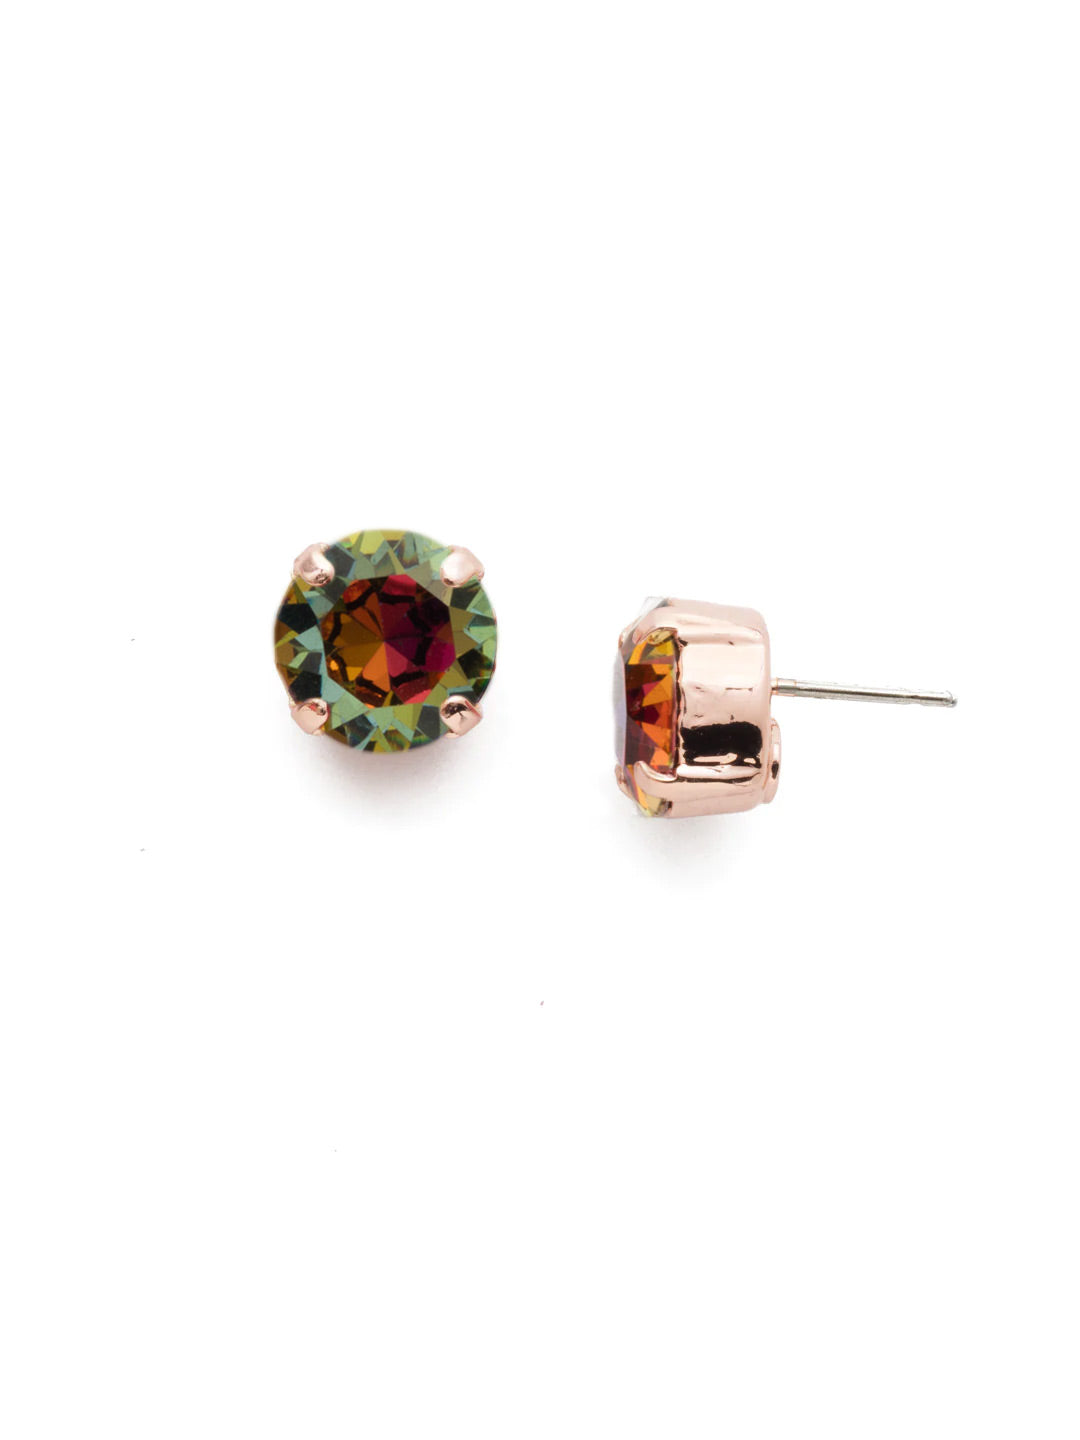 London Stud Earrings - ECM14RGVO - <p>Everyone needs a great pair of studs. Add some classic sparkle to any occasion with these stud earrings. Need help picking a stud? <a href="https://www.sorrelli.com/blogs/sisterhood/round-stud-earrings-101-a-rundown-of-sizes-styles-and-sparkle">Check out our size guide!</a> From Sorrelli's Volcano collection in our Rose Gold-tone finish.</p>